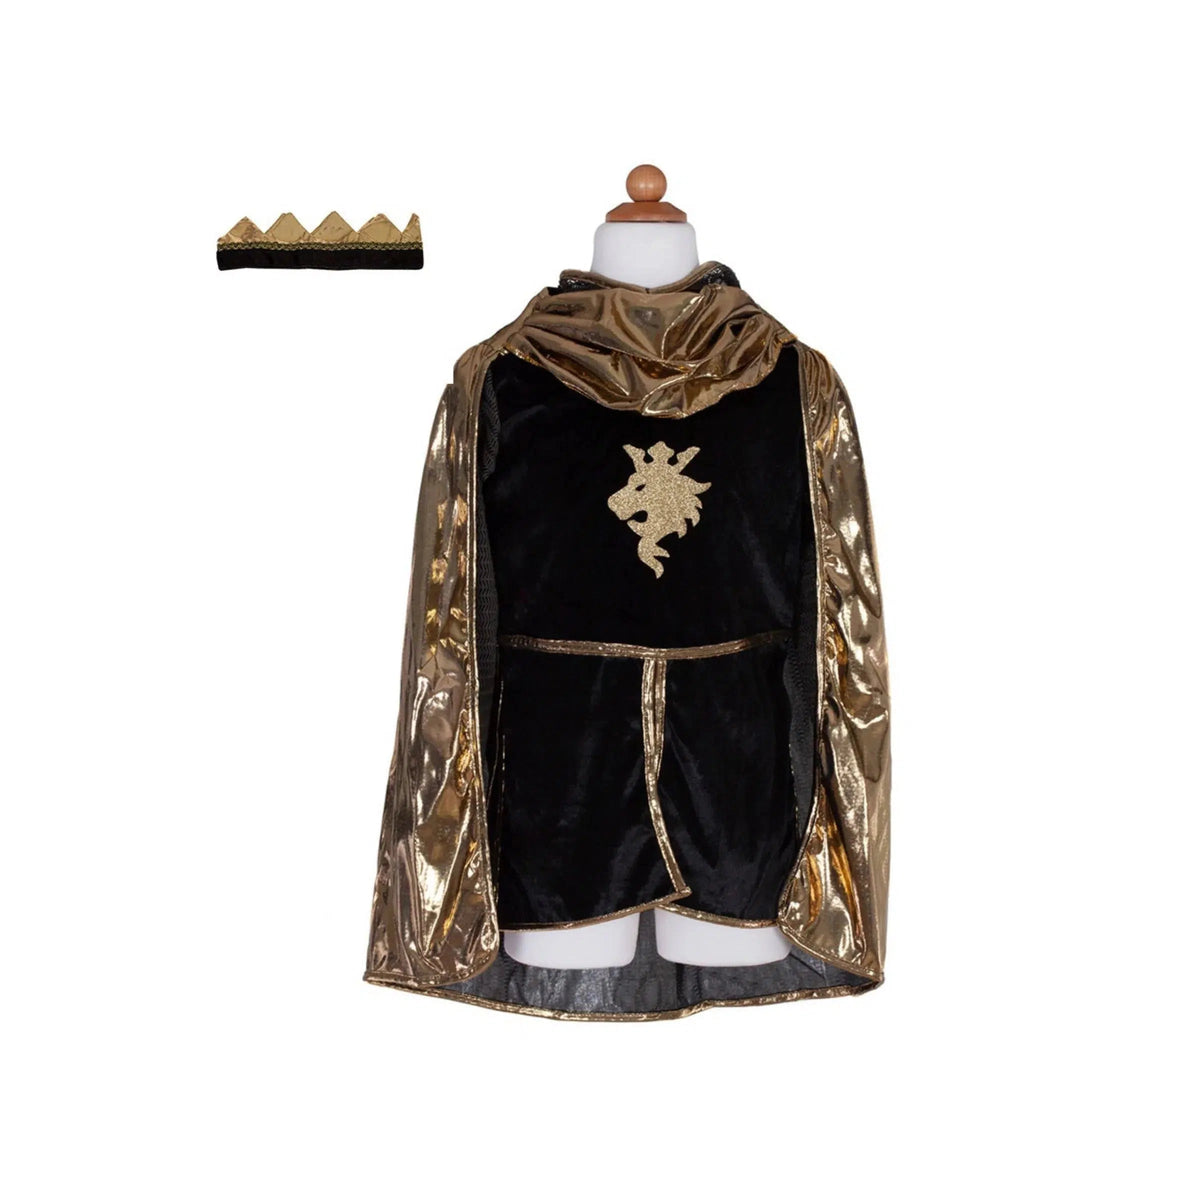 The tunic, cape and crown on a white background